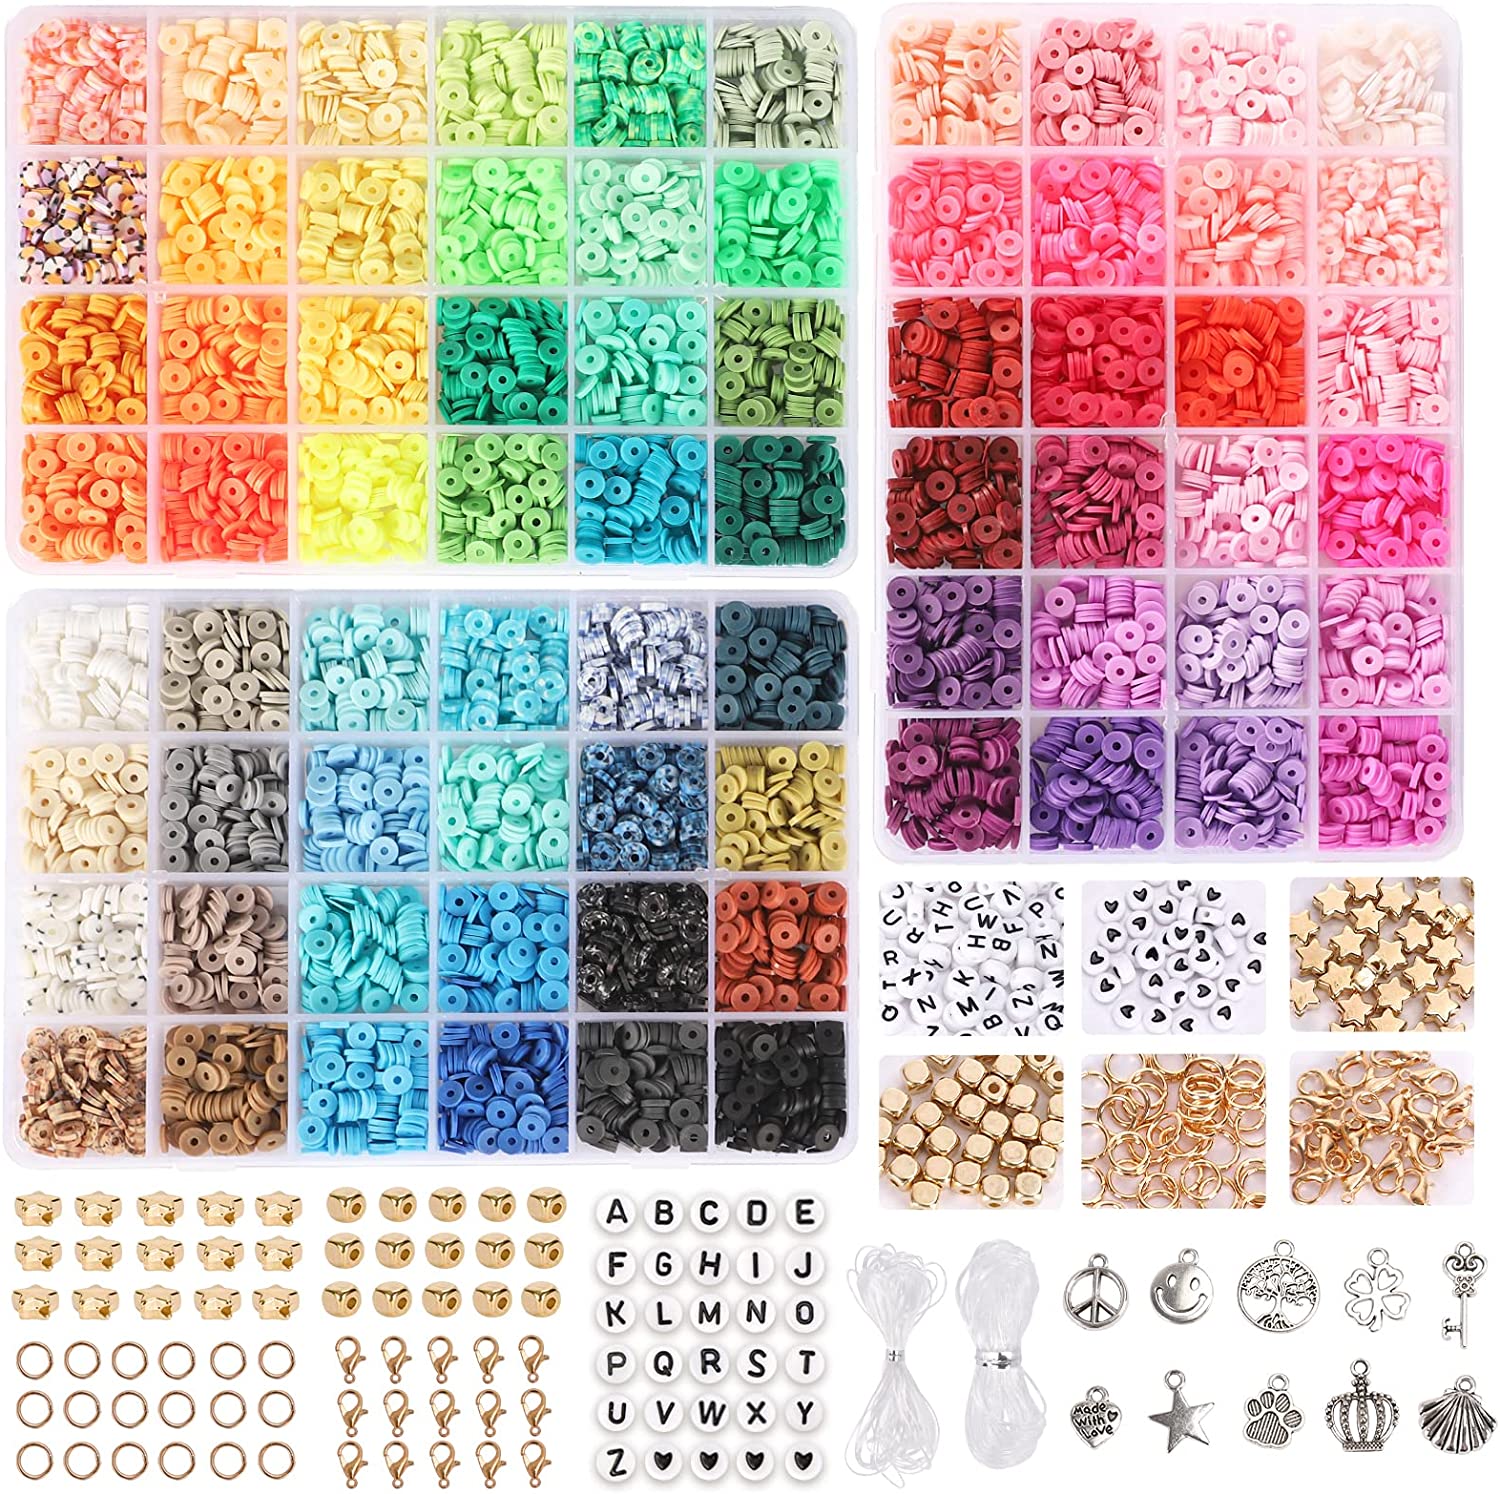 QUEFE 72 Colors Clay Beads for Bracelet Making Kit Flat Round Polymer Clay  Beads Spacer Heishi Beads for Jewelry Making with Random Pendant Charms Kit  Letter Beads and Elastic Strings